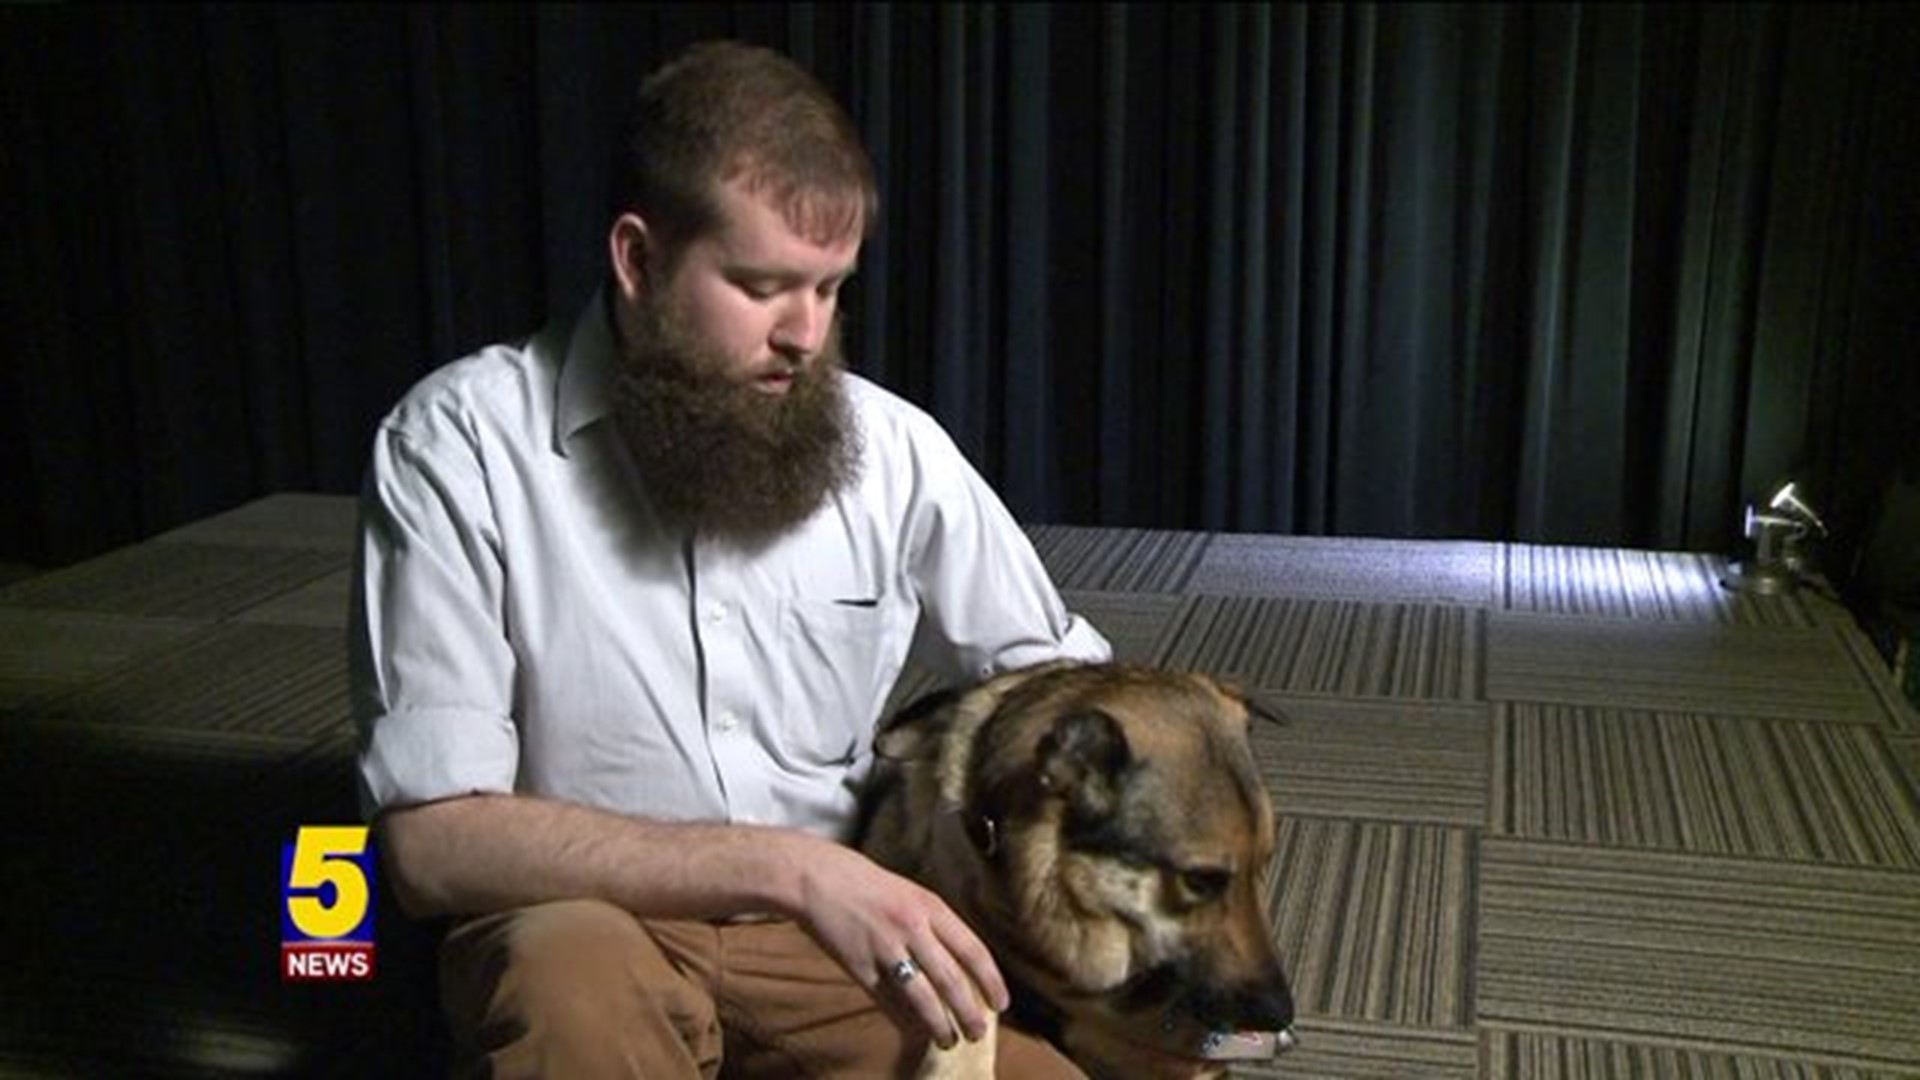 Local Group Pairs Veterans With PTSD With Service Dogs